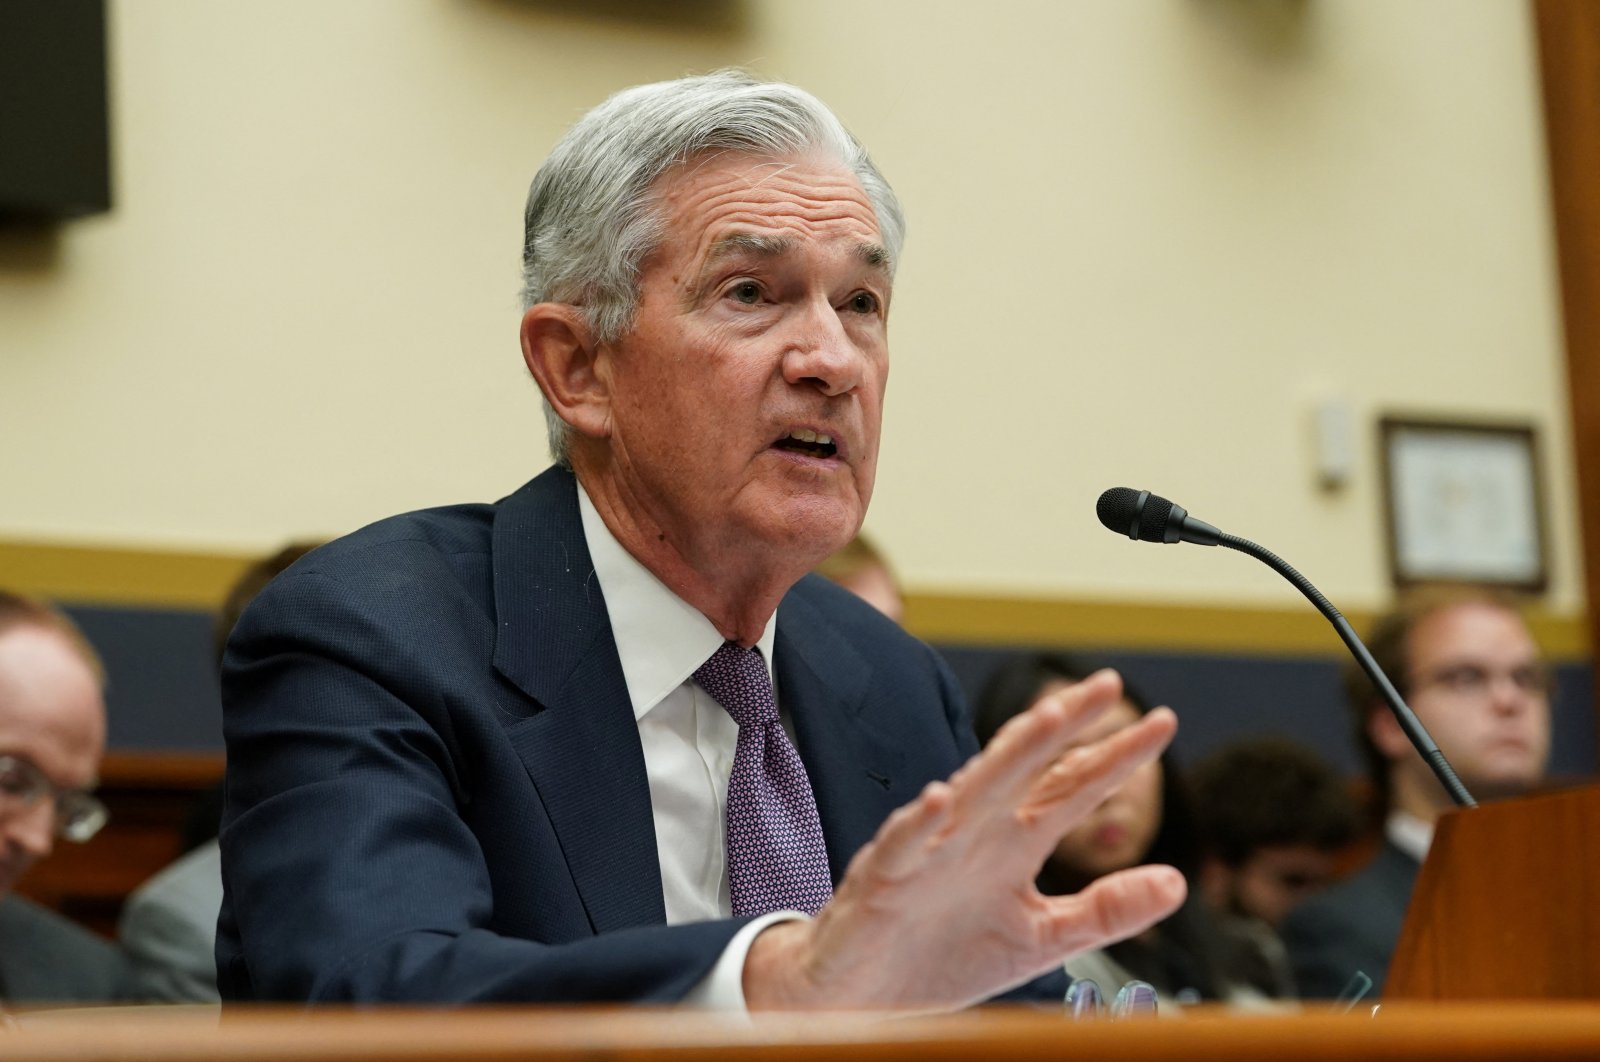 Federal Reserve Chair Jerome H. Powell testifies before a House Financial Services hearing on &quot;The Federal Reserve&#039;s Semi-Annual Monetary Policy Report&quot; on Capitol Hill in Washington, U.S., March 8, 2023. (REUTERS/Kevin Lamarque)